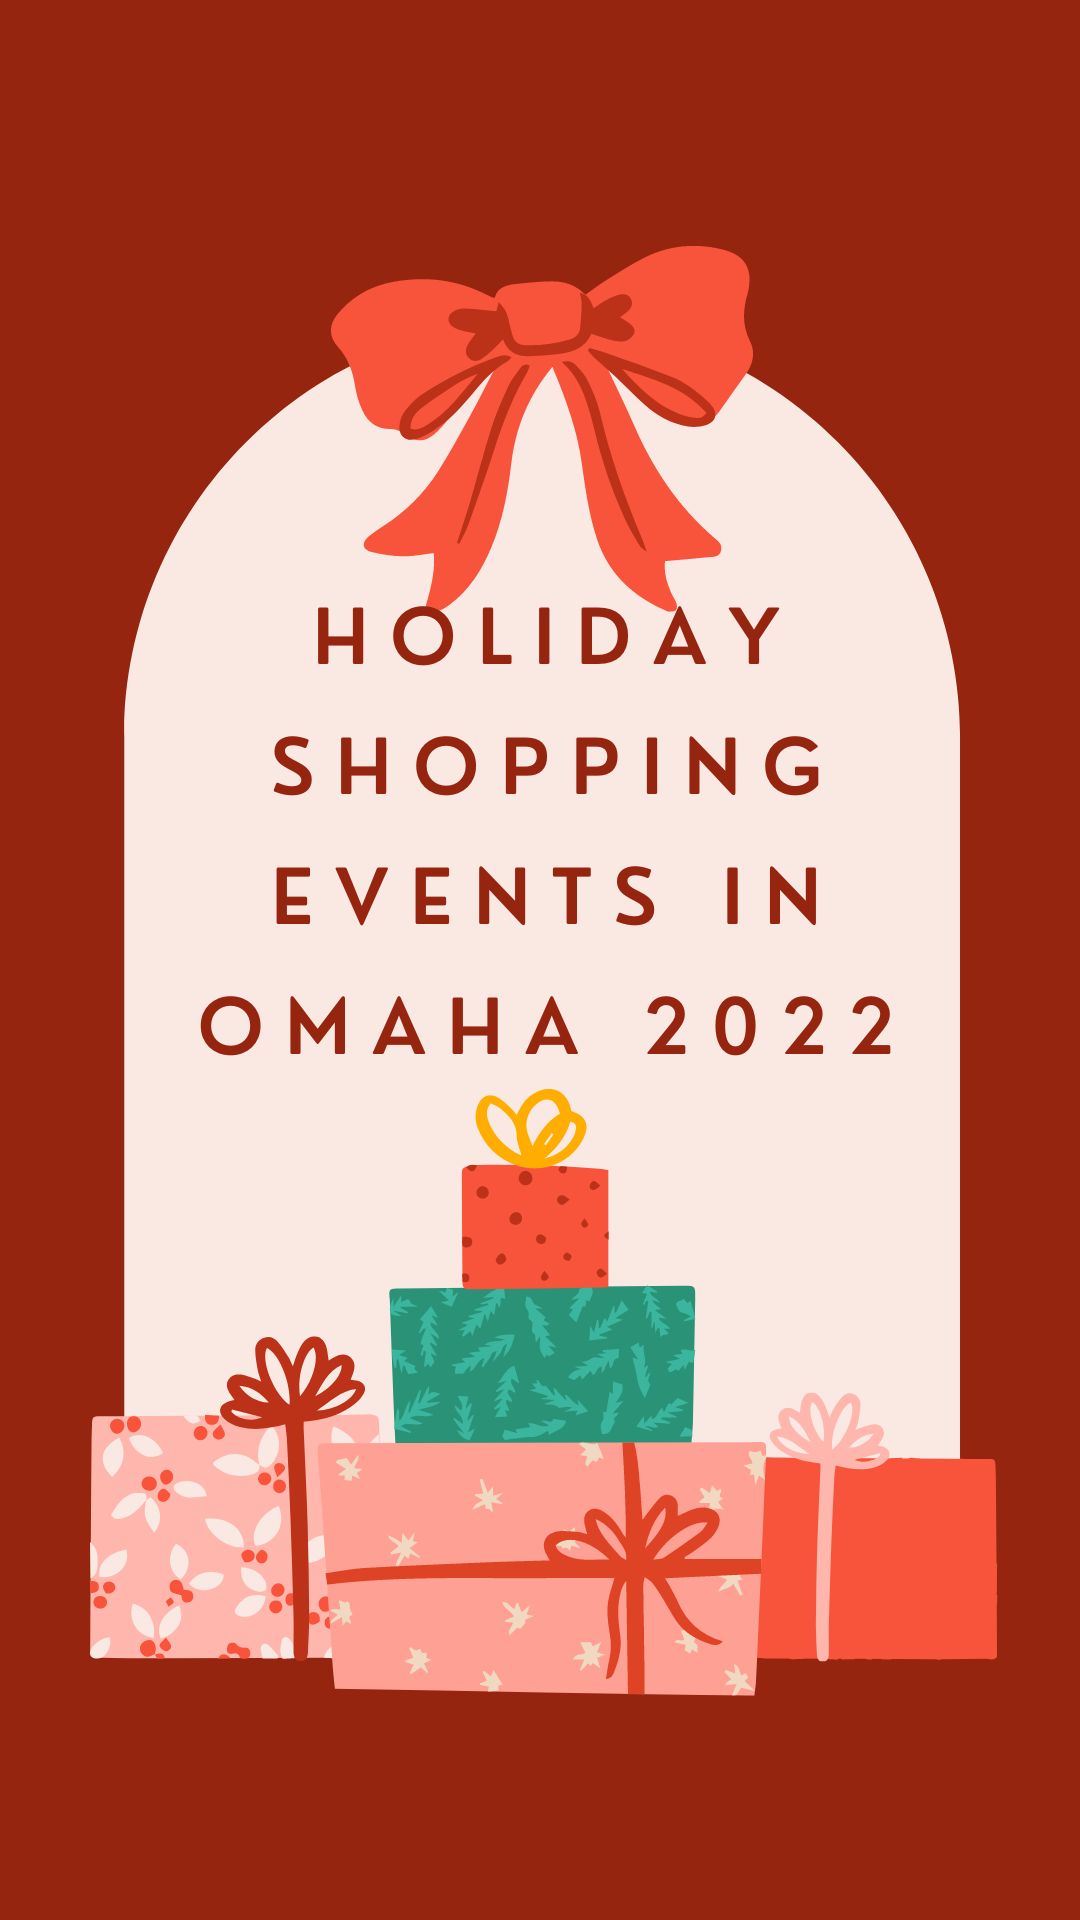 Holiday Shopping Events in Omaha 2022